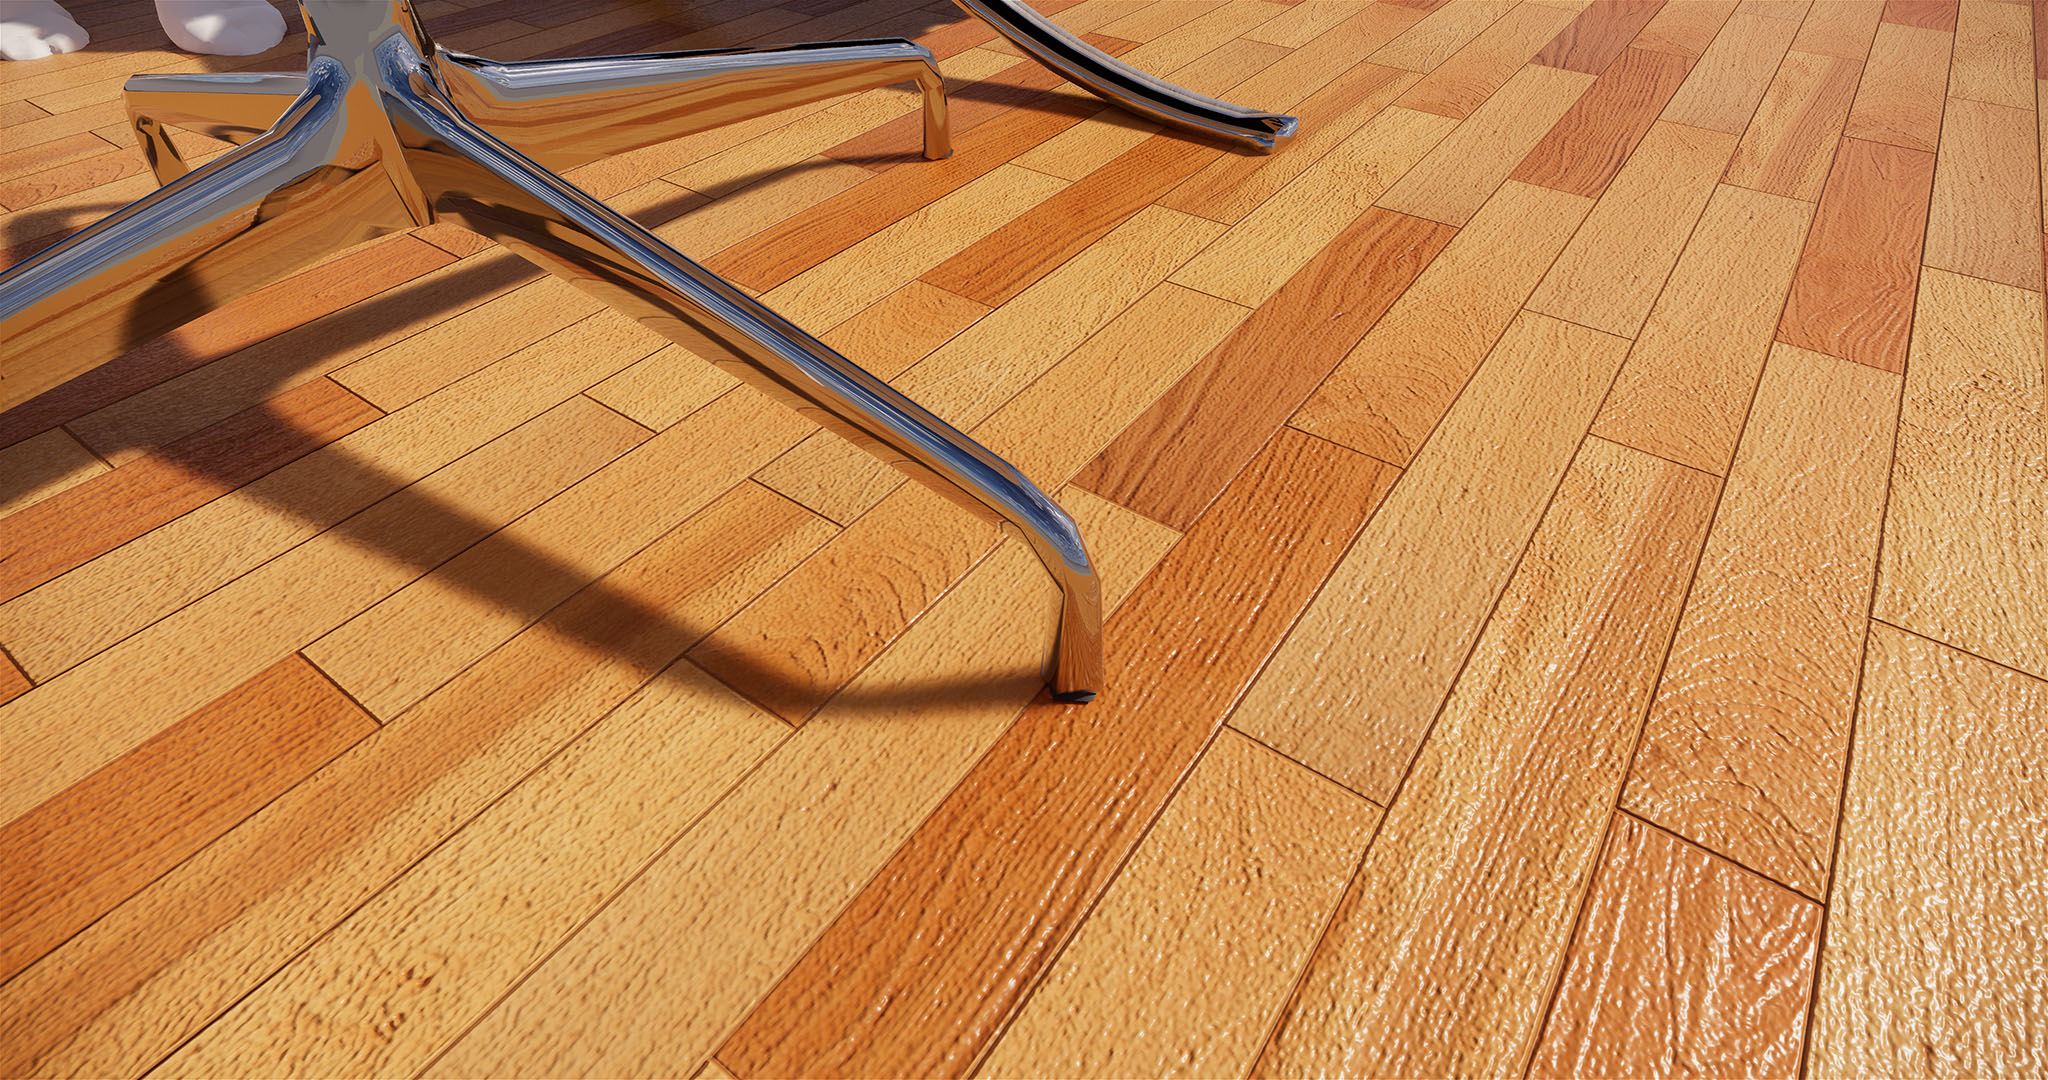 Wood flooring material – Bump height adjusted